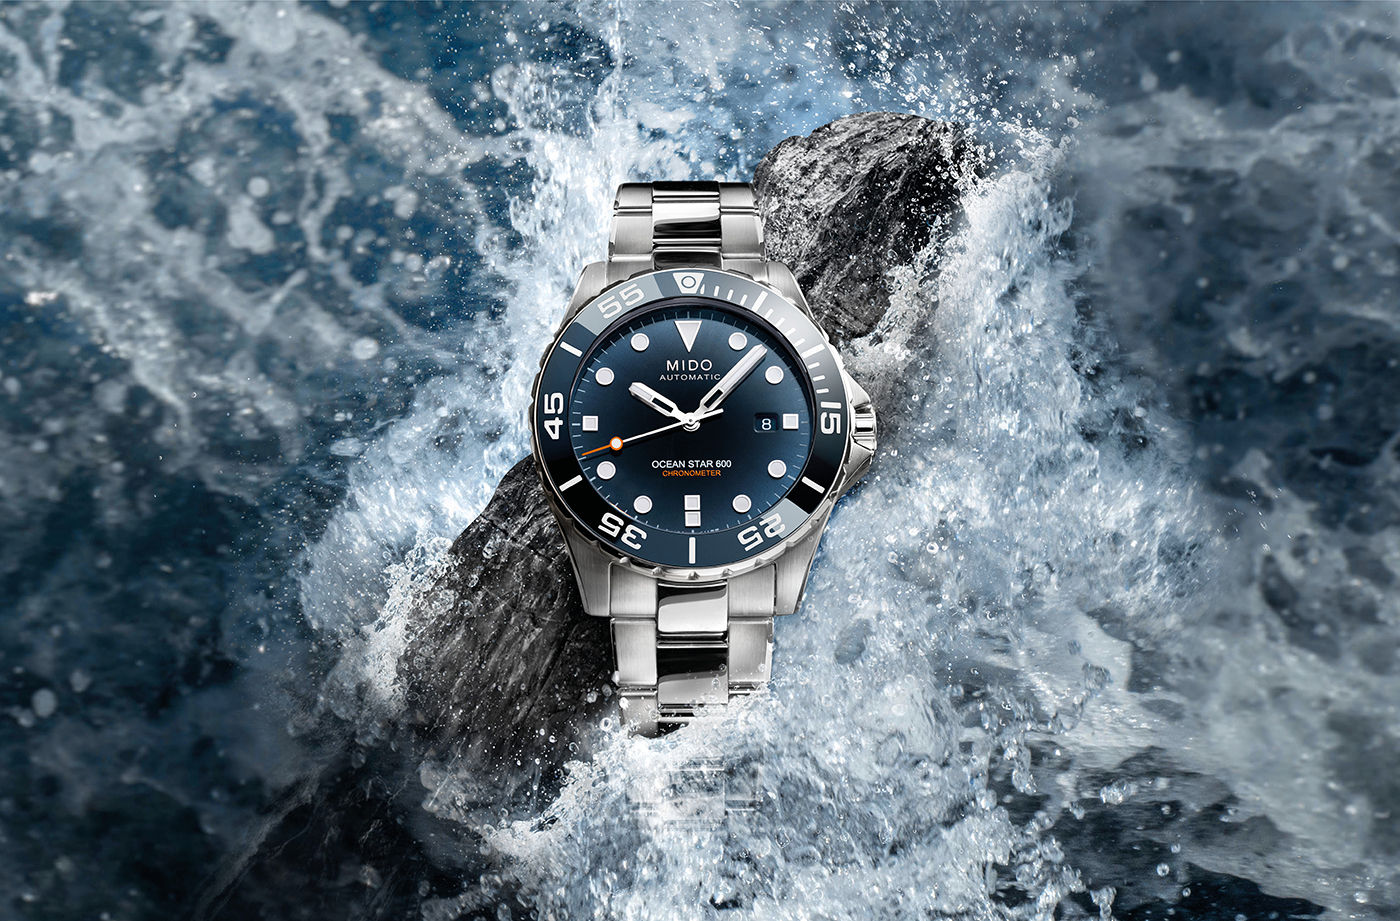 Mido Ocean Star 600 Chronometer: Technical Specs at Unequalled Price